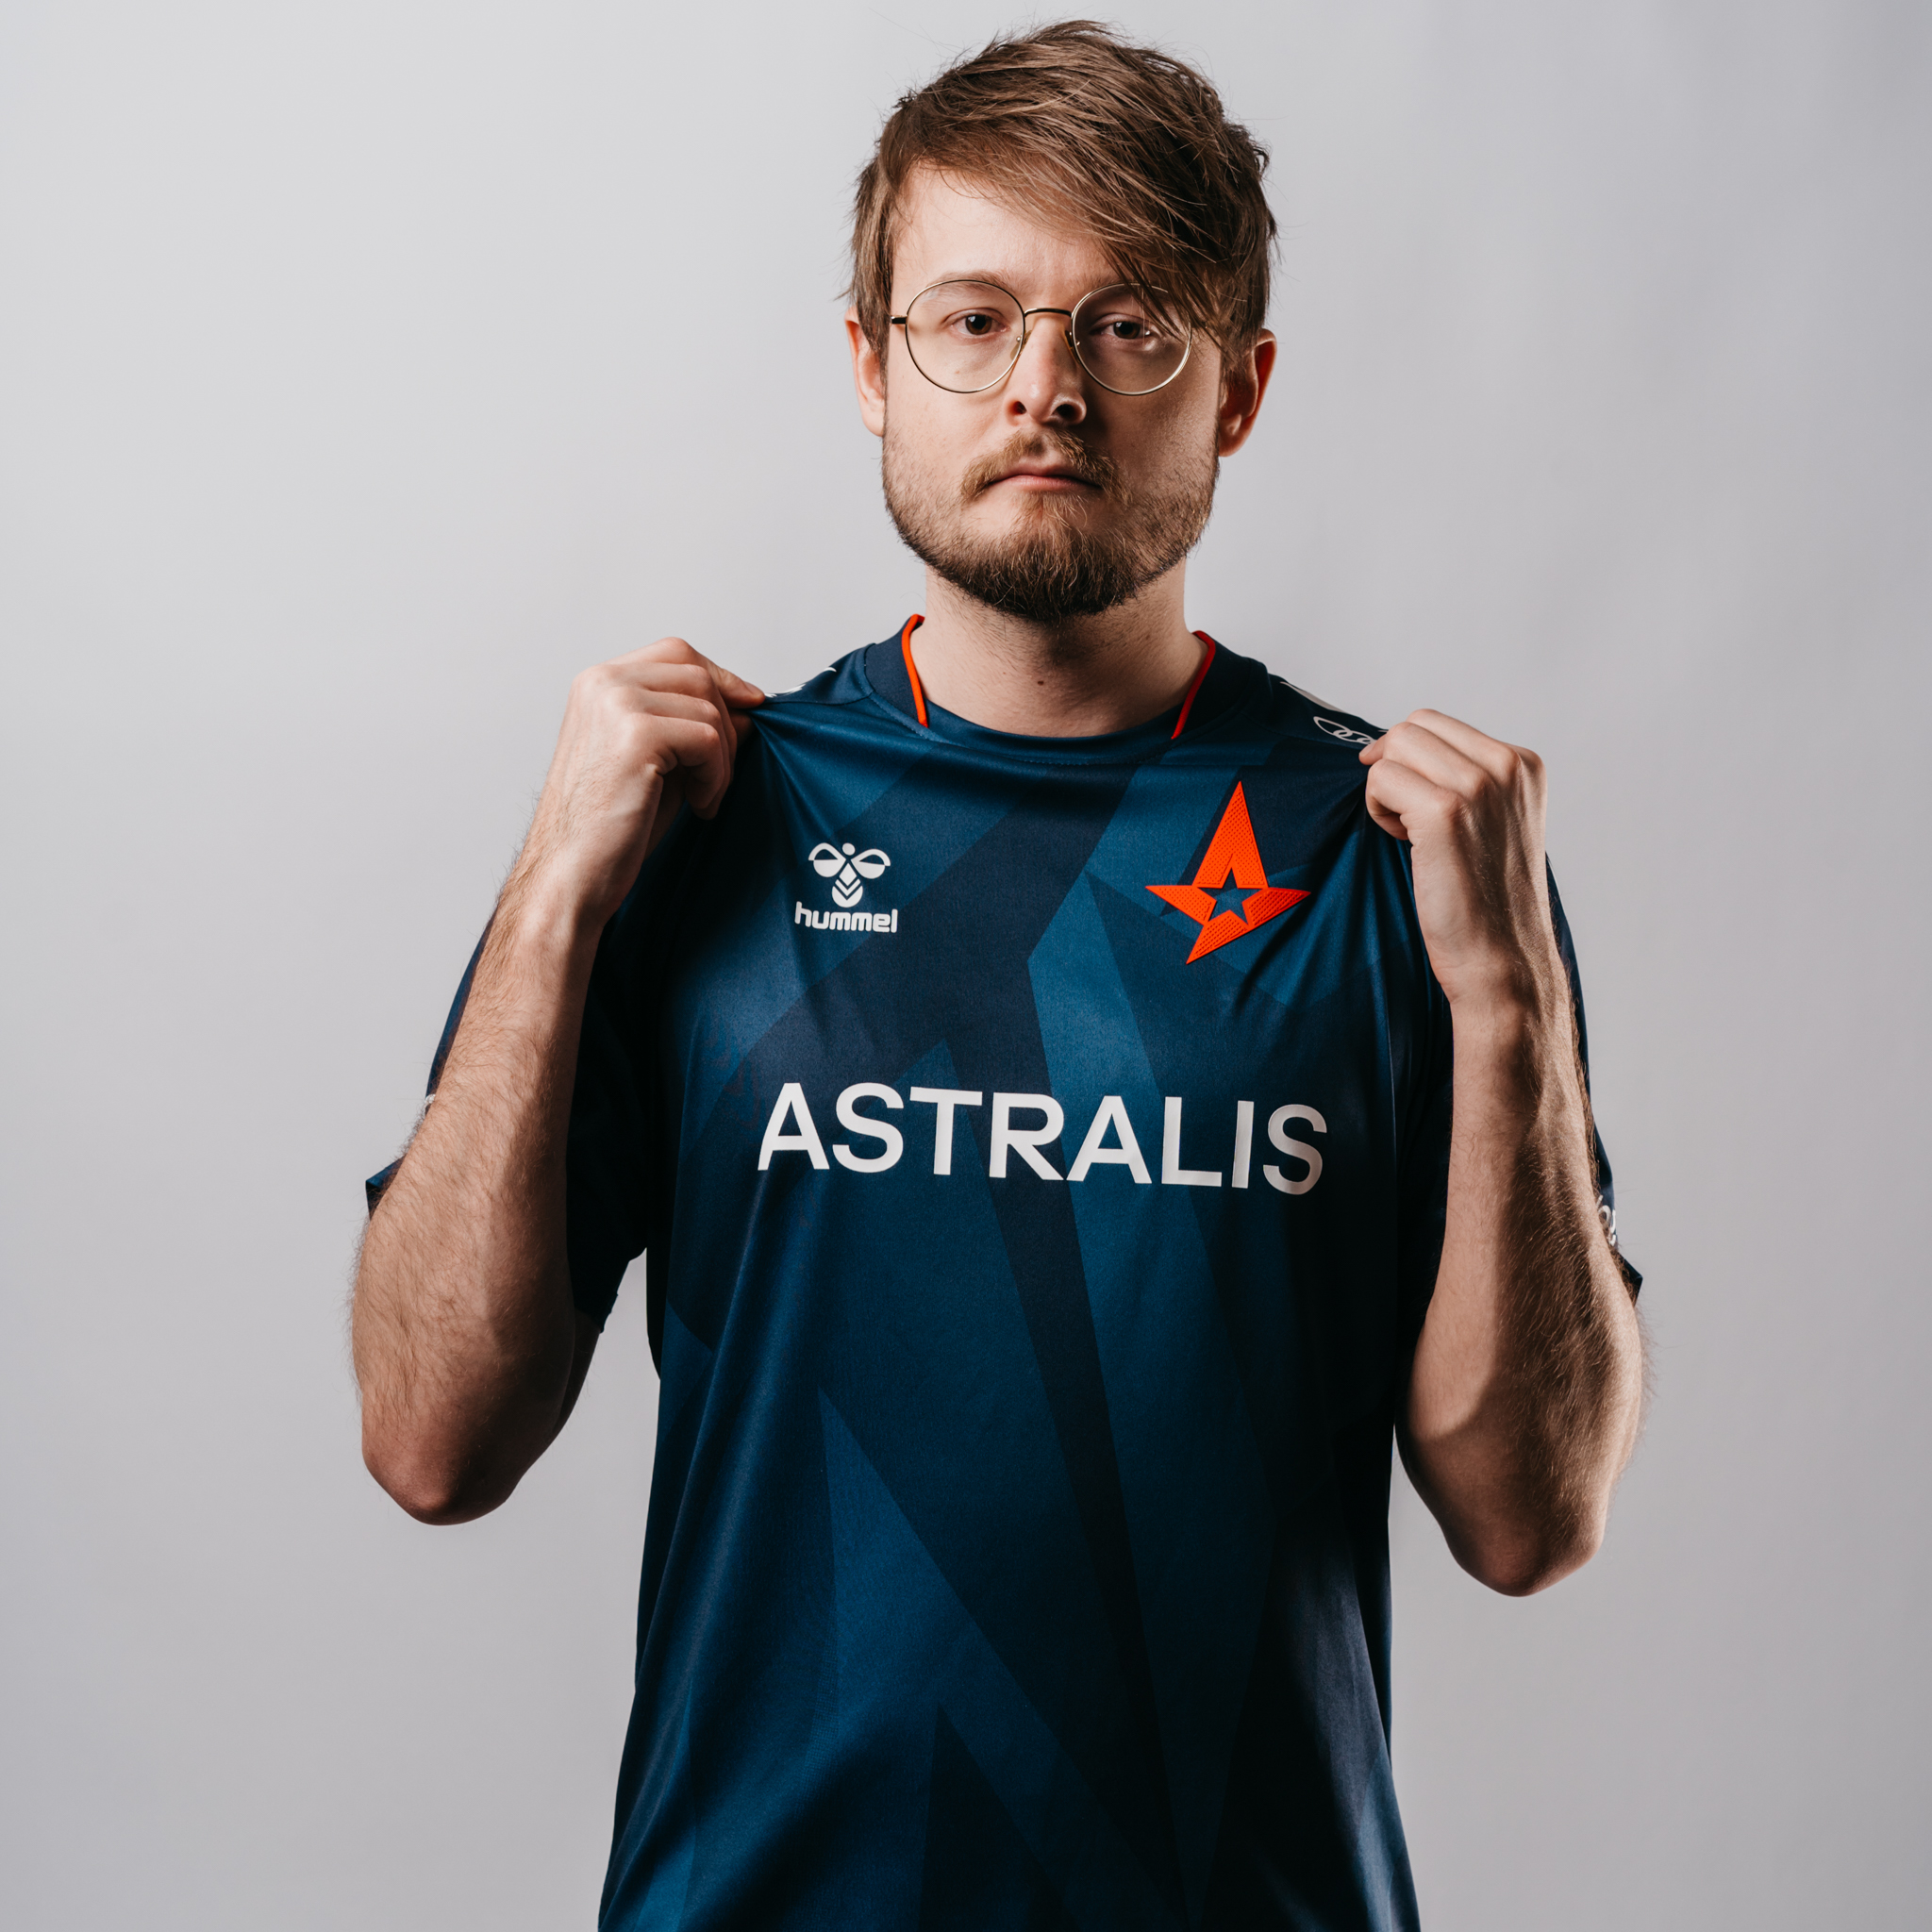 Astralis League of Legends on "✨ JERSEY GIVEAWAY✨ Let's celebrate the start of Astralis in #LEC! Win our new jersey by doing the following: ➡️Follow @AstralisLoL ➡️RT this post ➡️Comment this